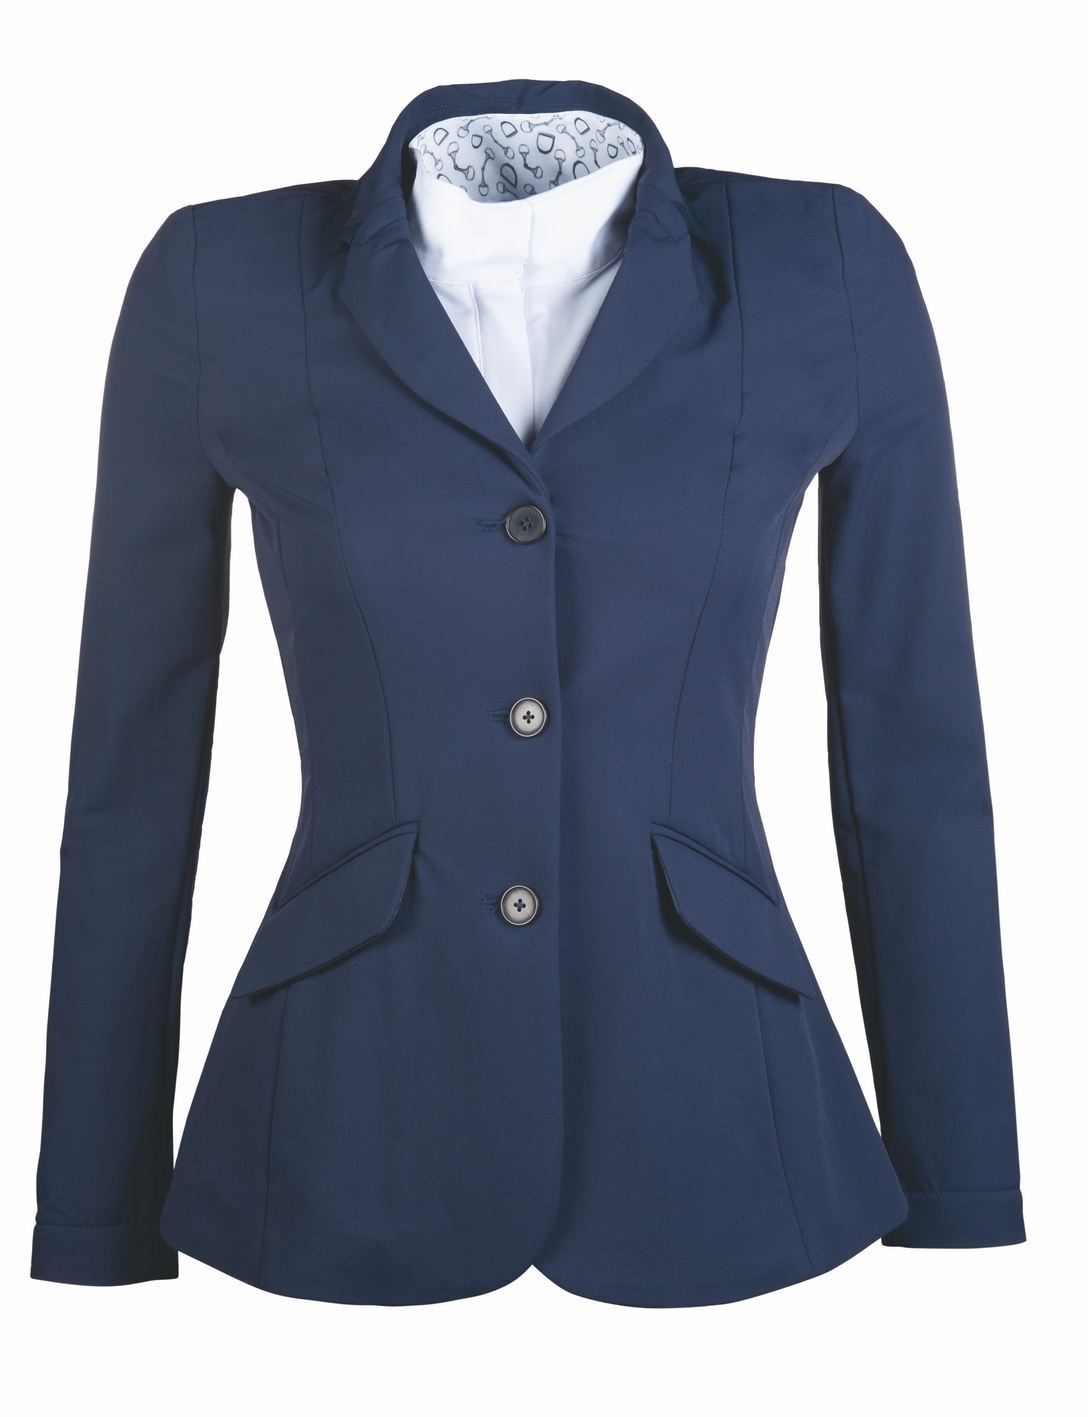 HKM Competition Jacket Woman Hunter - Just Horse Riders